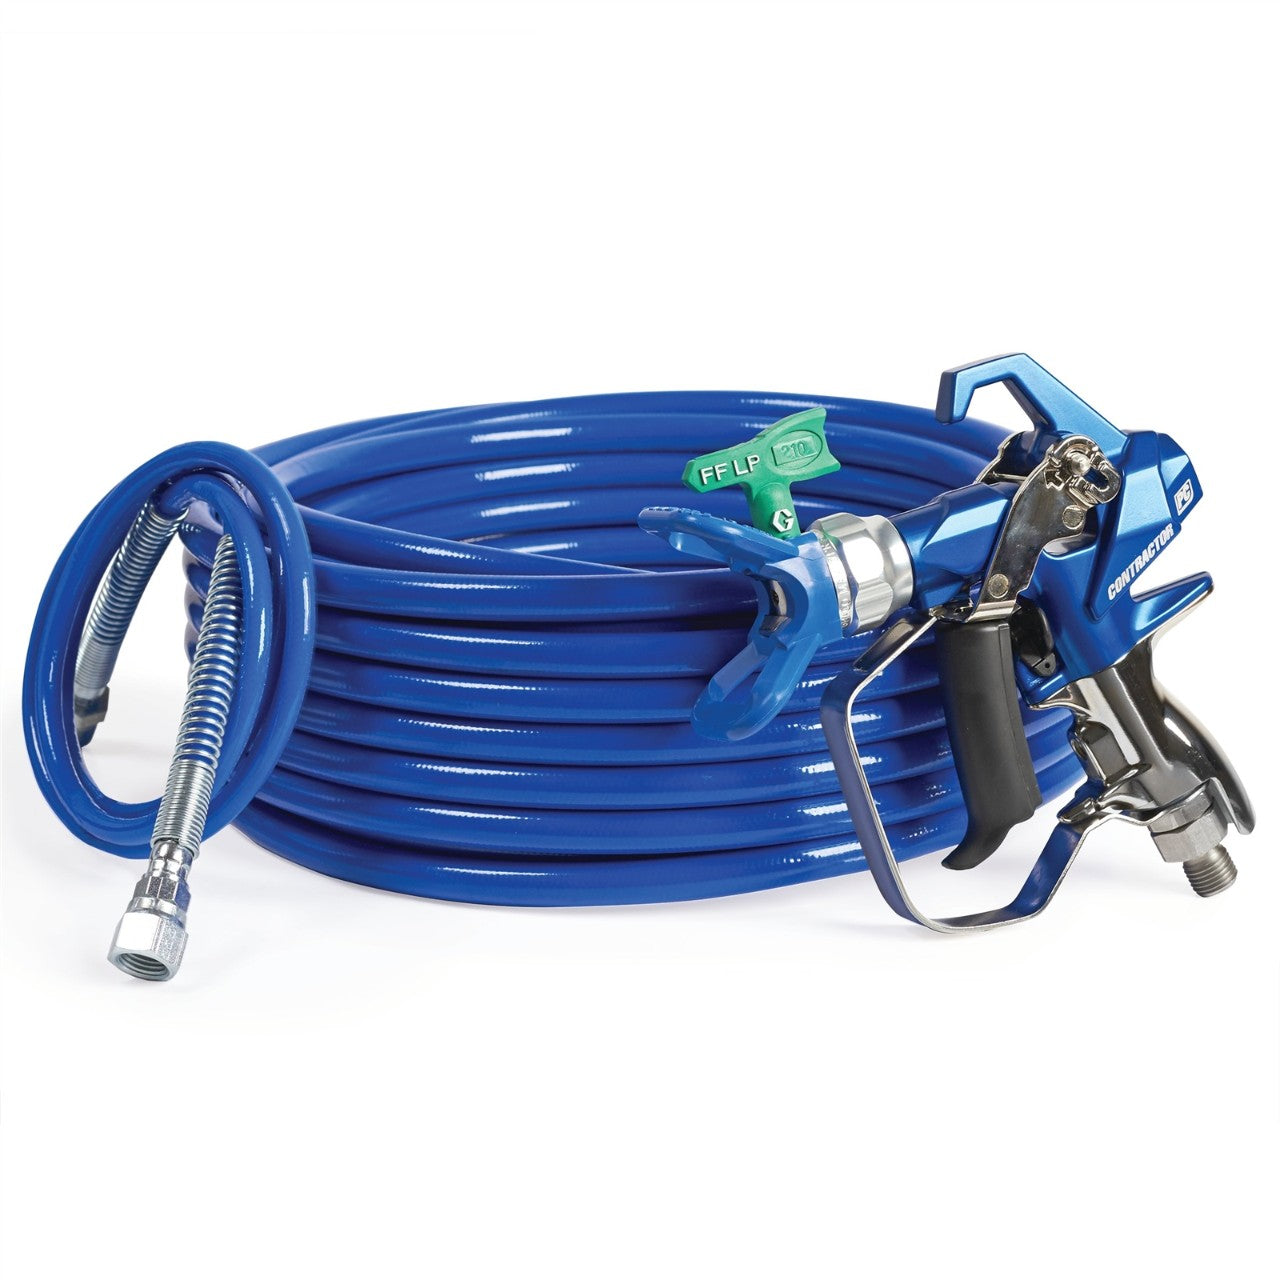 Graco 19Y490 Contractor PC Compact Gun Kit with RAC X FFLP 210, 1/4 in x 50 ft Hose, 1/8 in x 4.5 ft Whip Hose - The Paint People